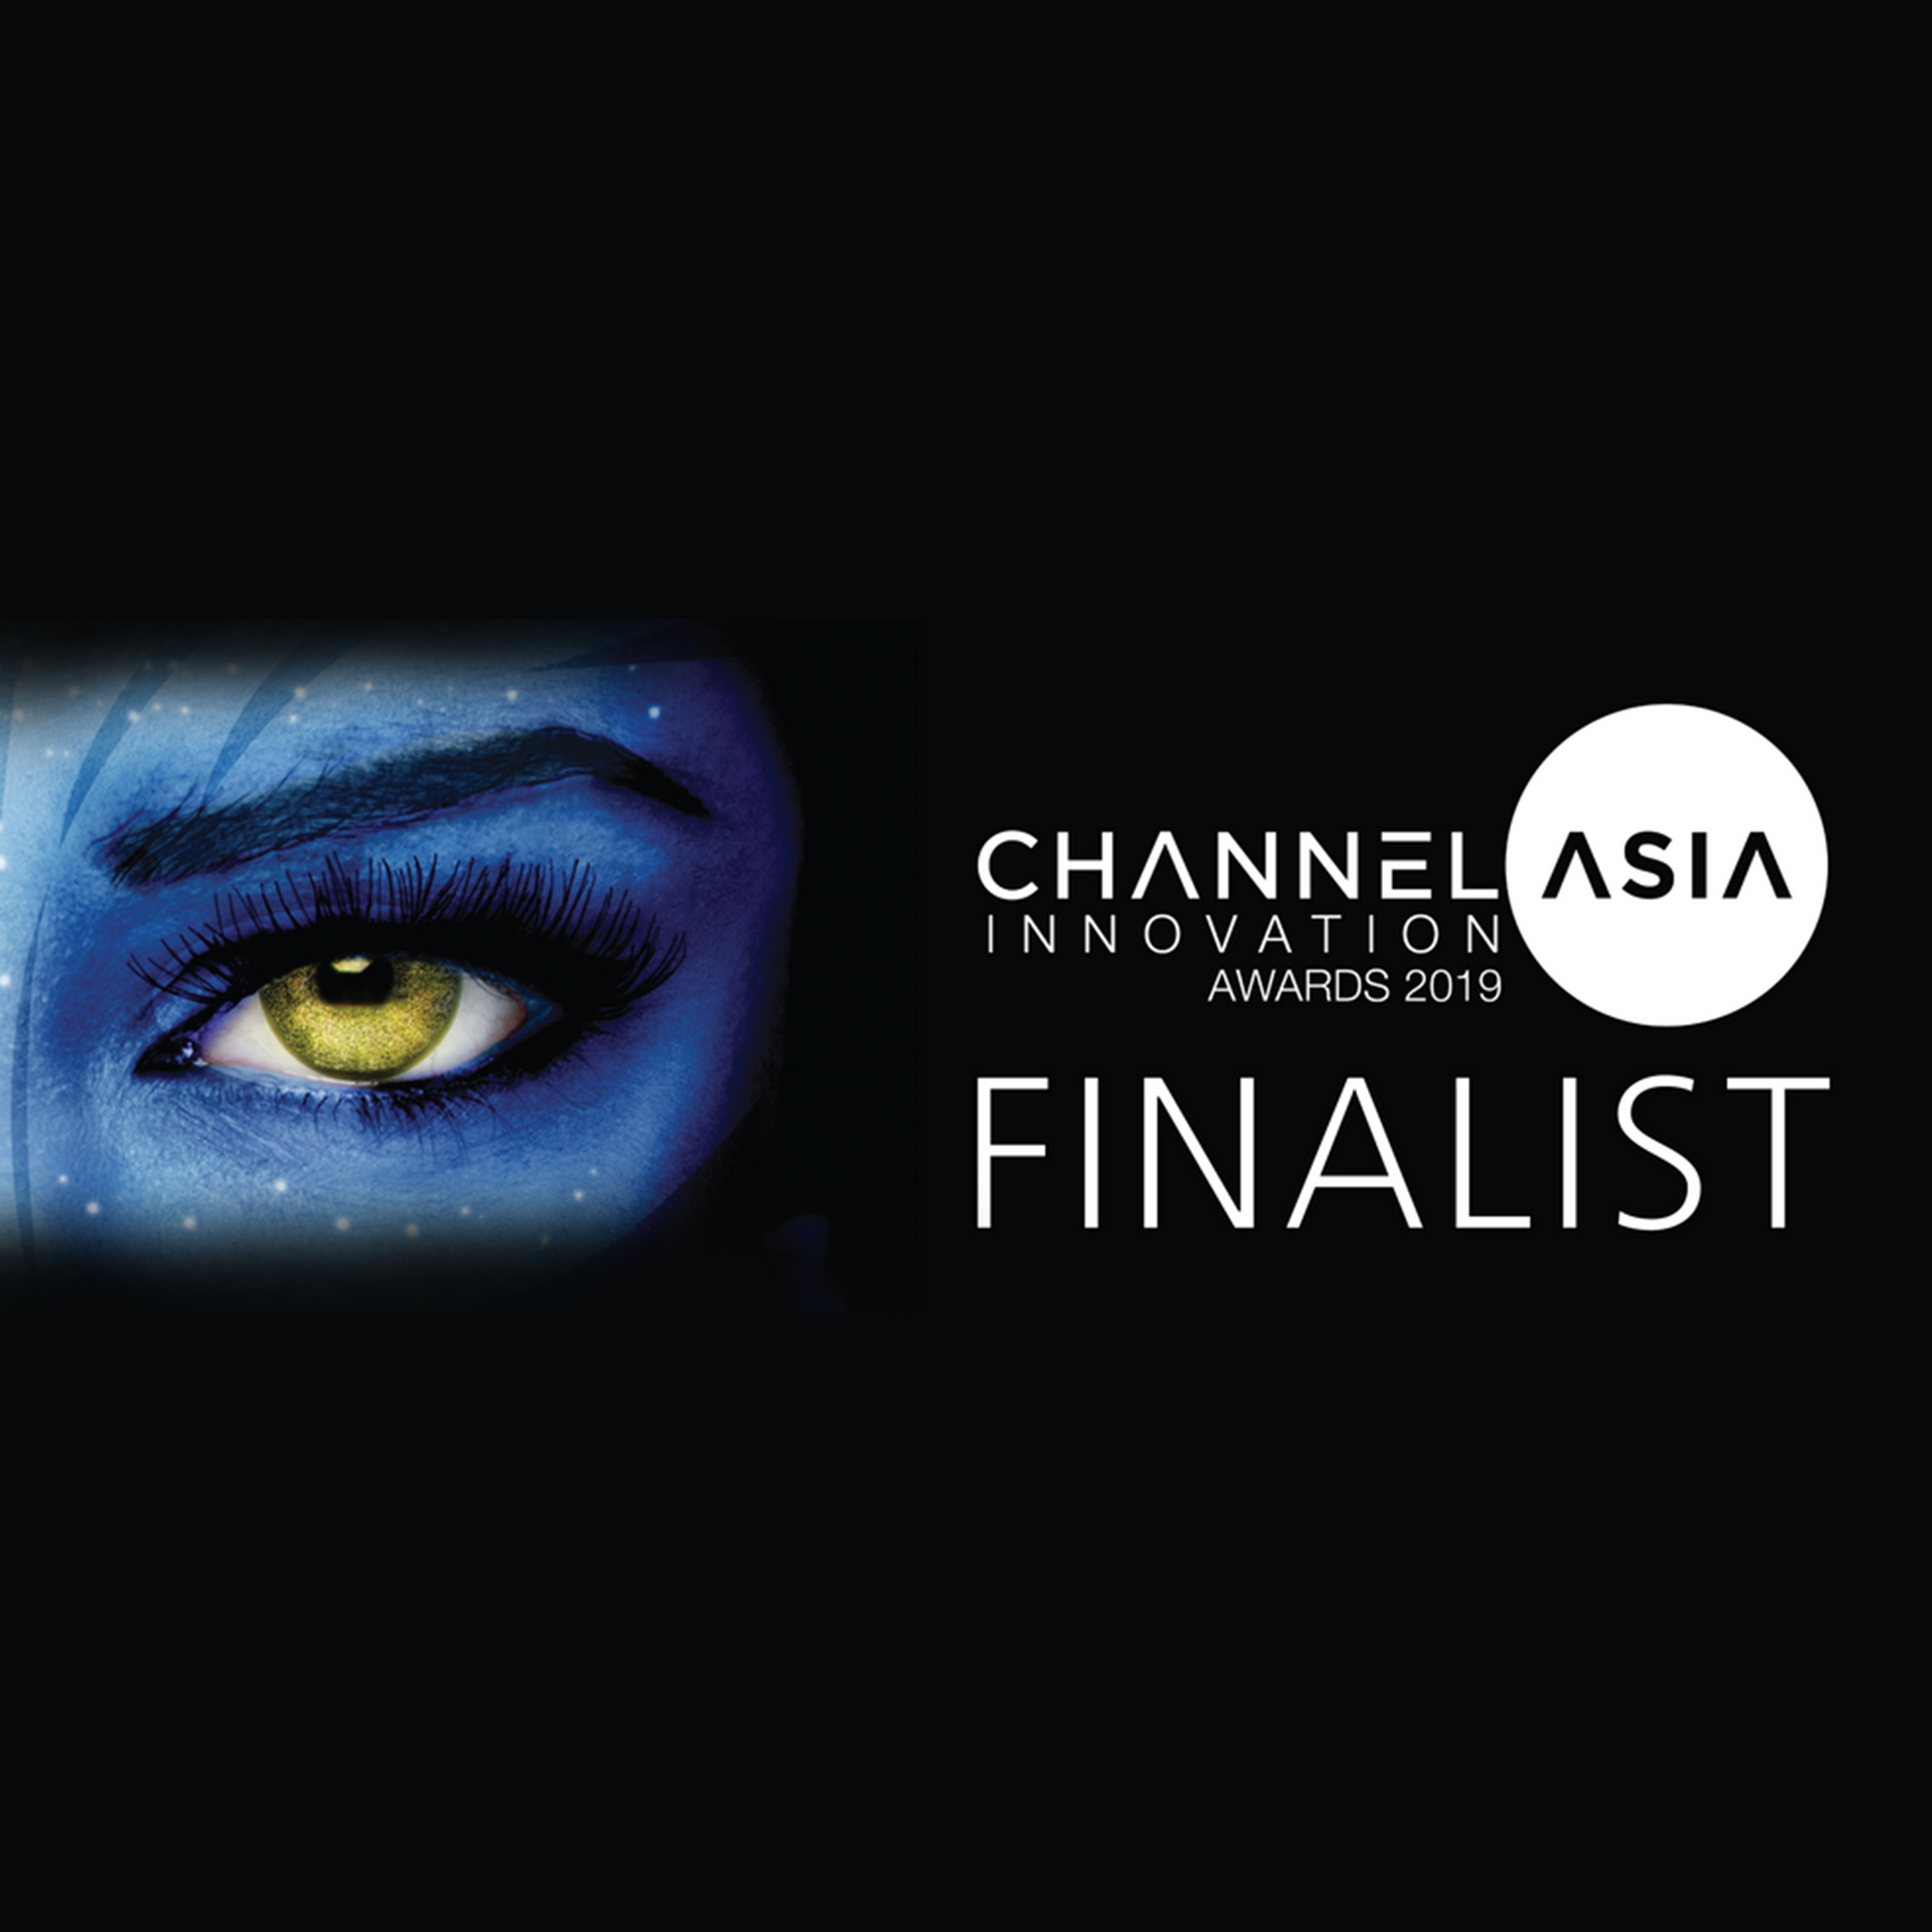 Mastersystem Infotama has been appointed as one of the Finalist in Channel Asia Innovation Awards 2019